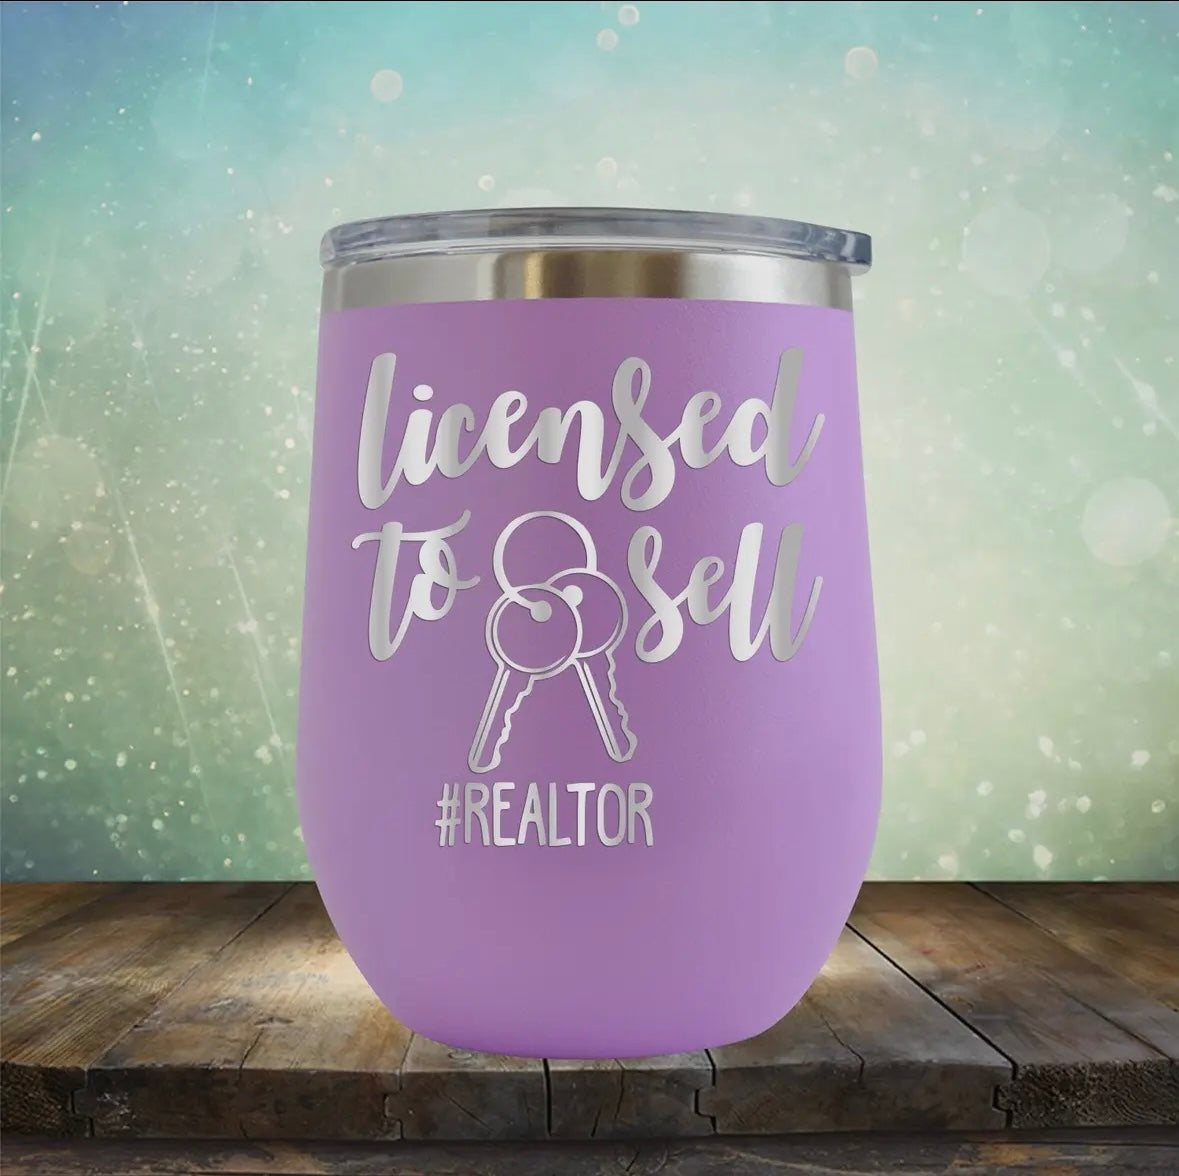 Lt. purple “Licensed to sell” wine cup